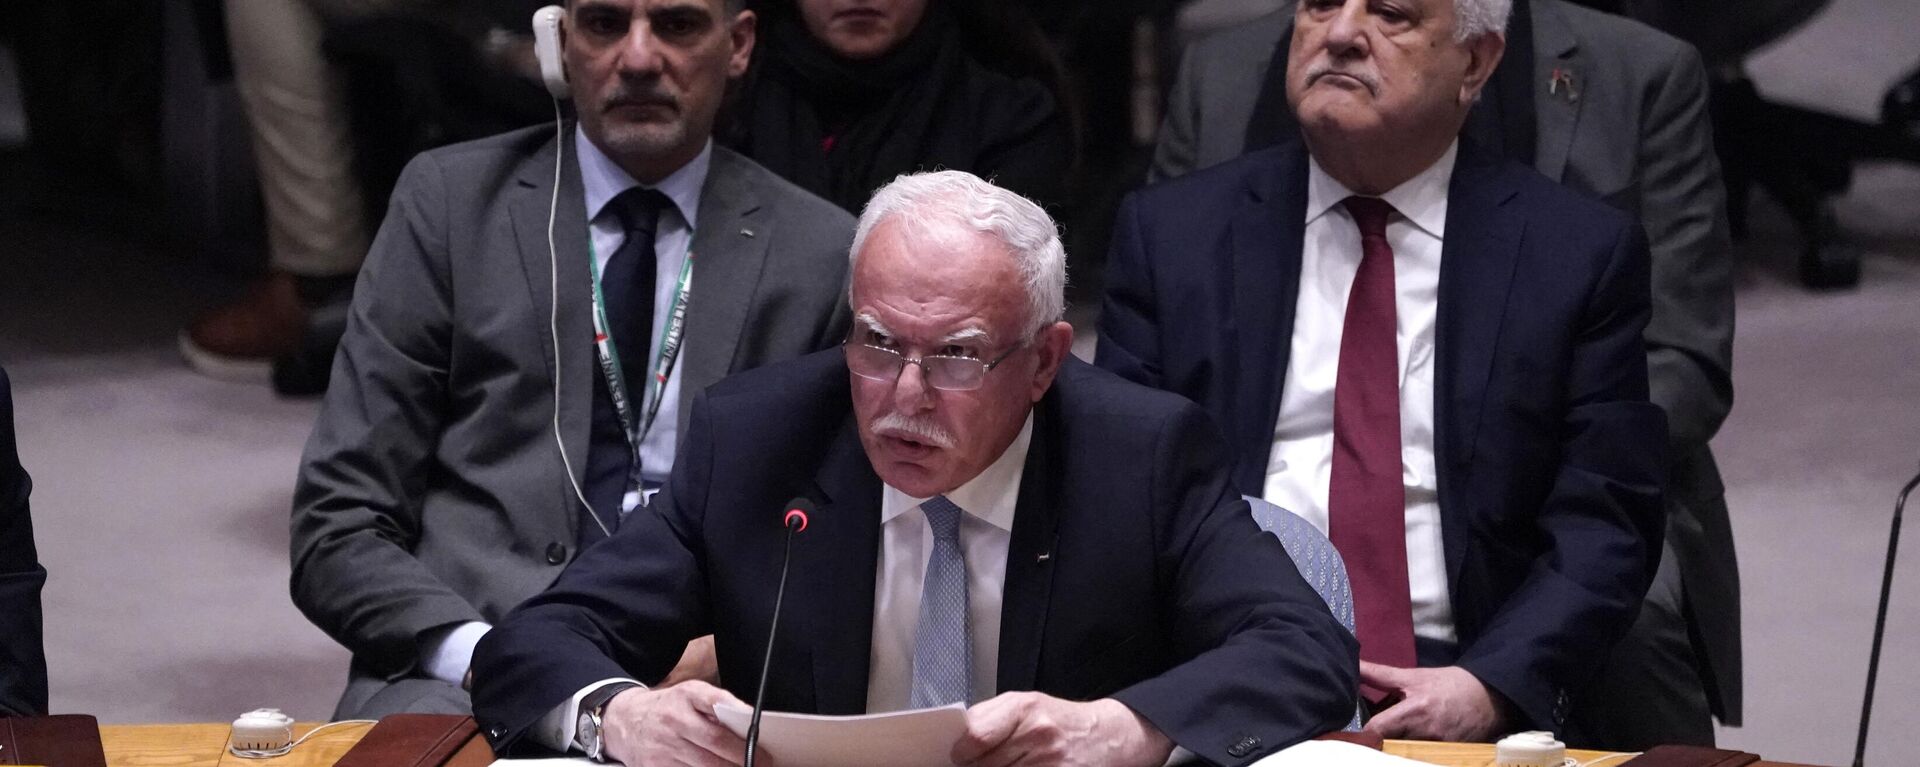 Palestinian Foreign Minister Riyad al-Maliki speaks during a United Nations (UN) Security Council meeting on the conflict in Middle East at the UN headquarters in New York City on October 24, 2023. - Sputnik Africa, 1920, 24.10.2023